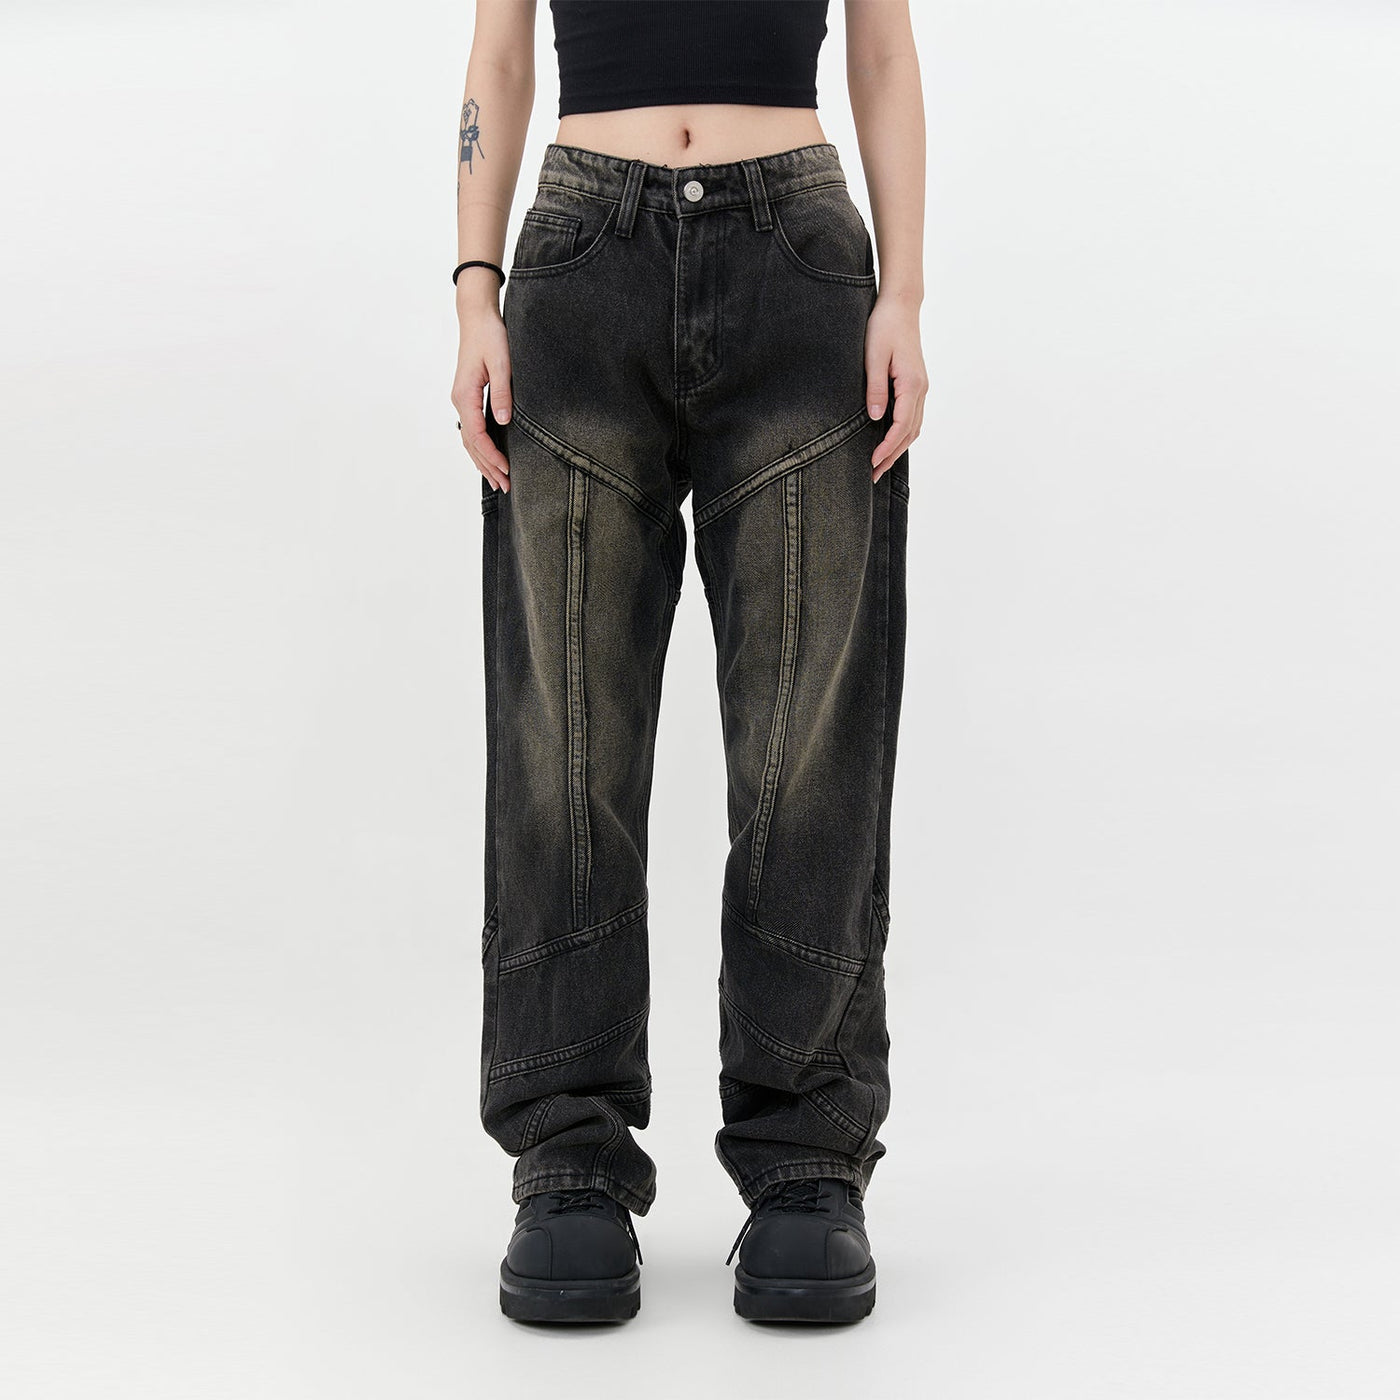 Vintage Washed Seam Detail Jeans Korean Street Fashion Jeans By Made Extreme Shop Online at OH Vault